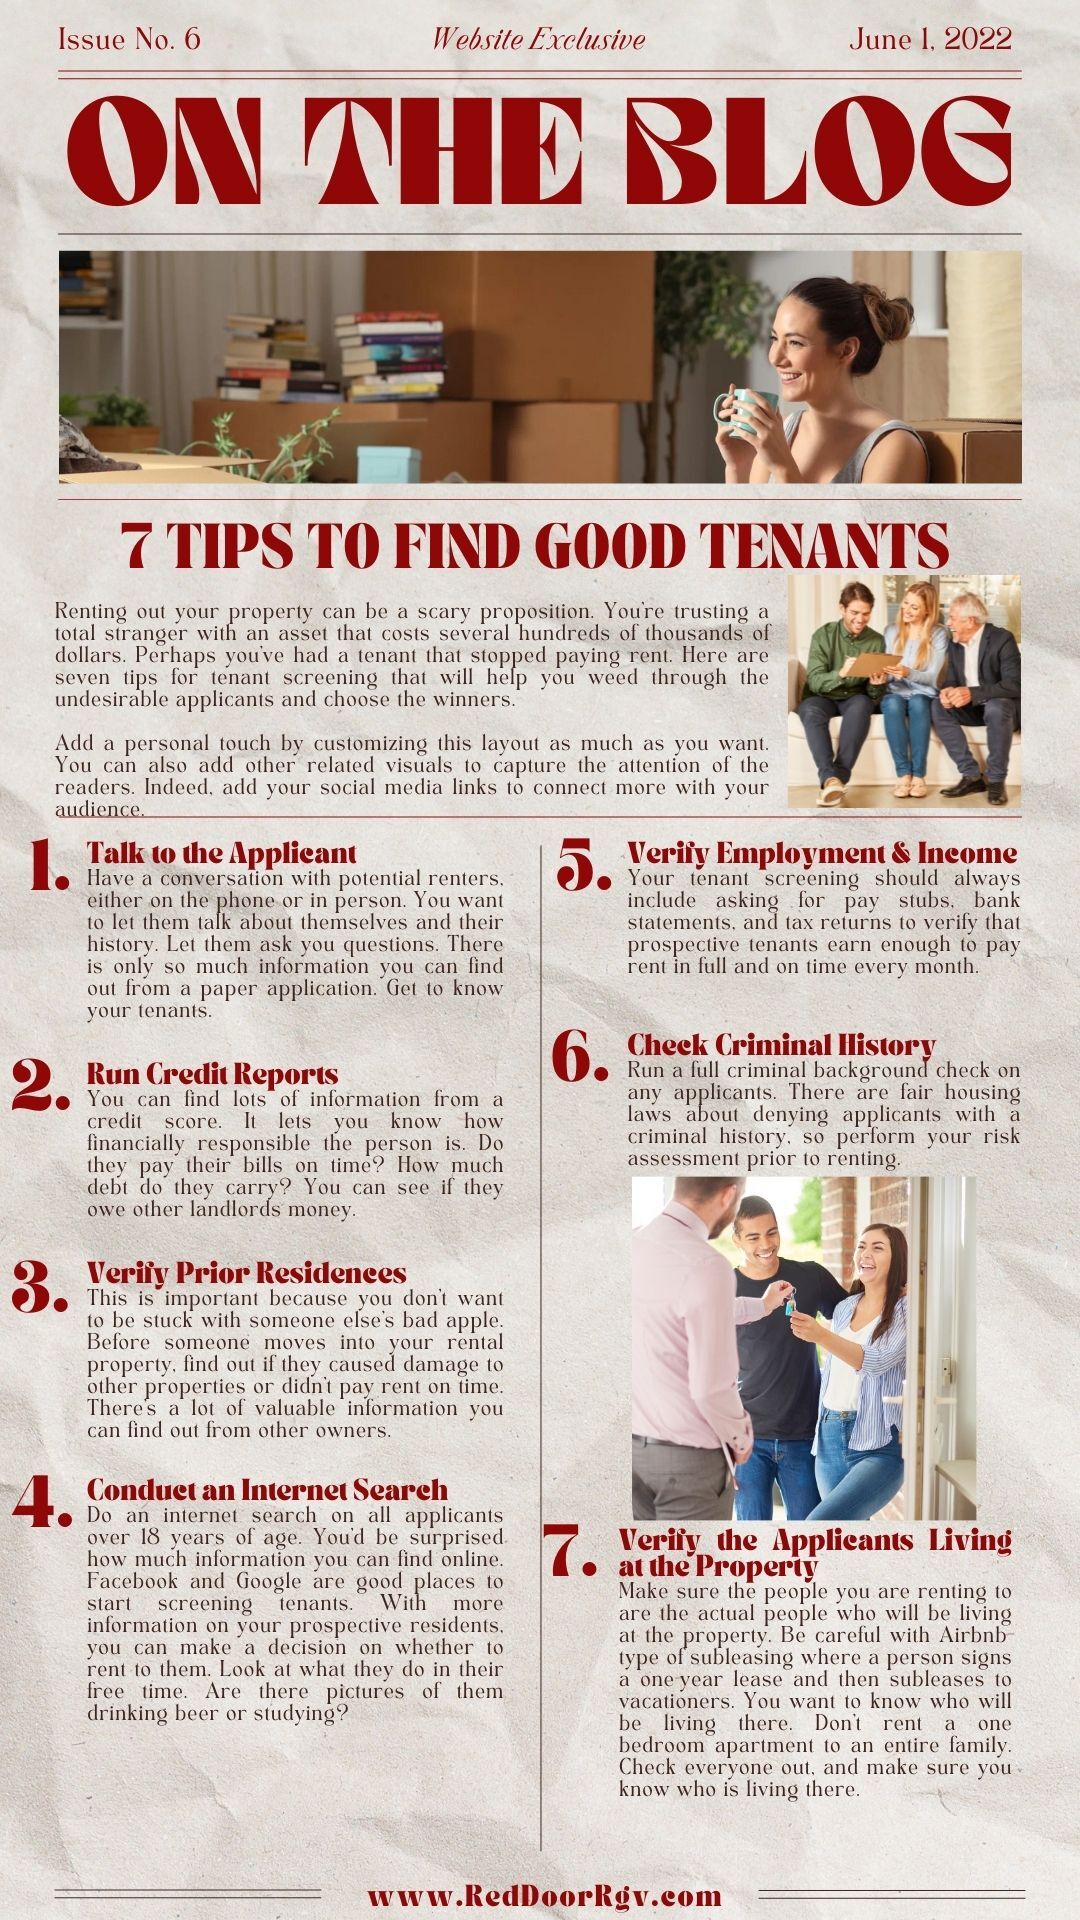 7 tips to find good tenants